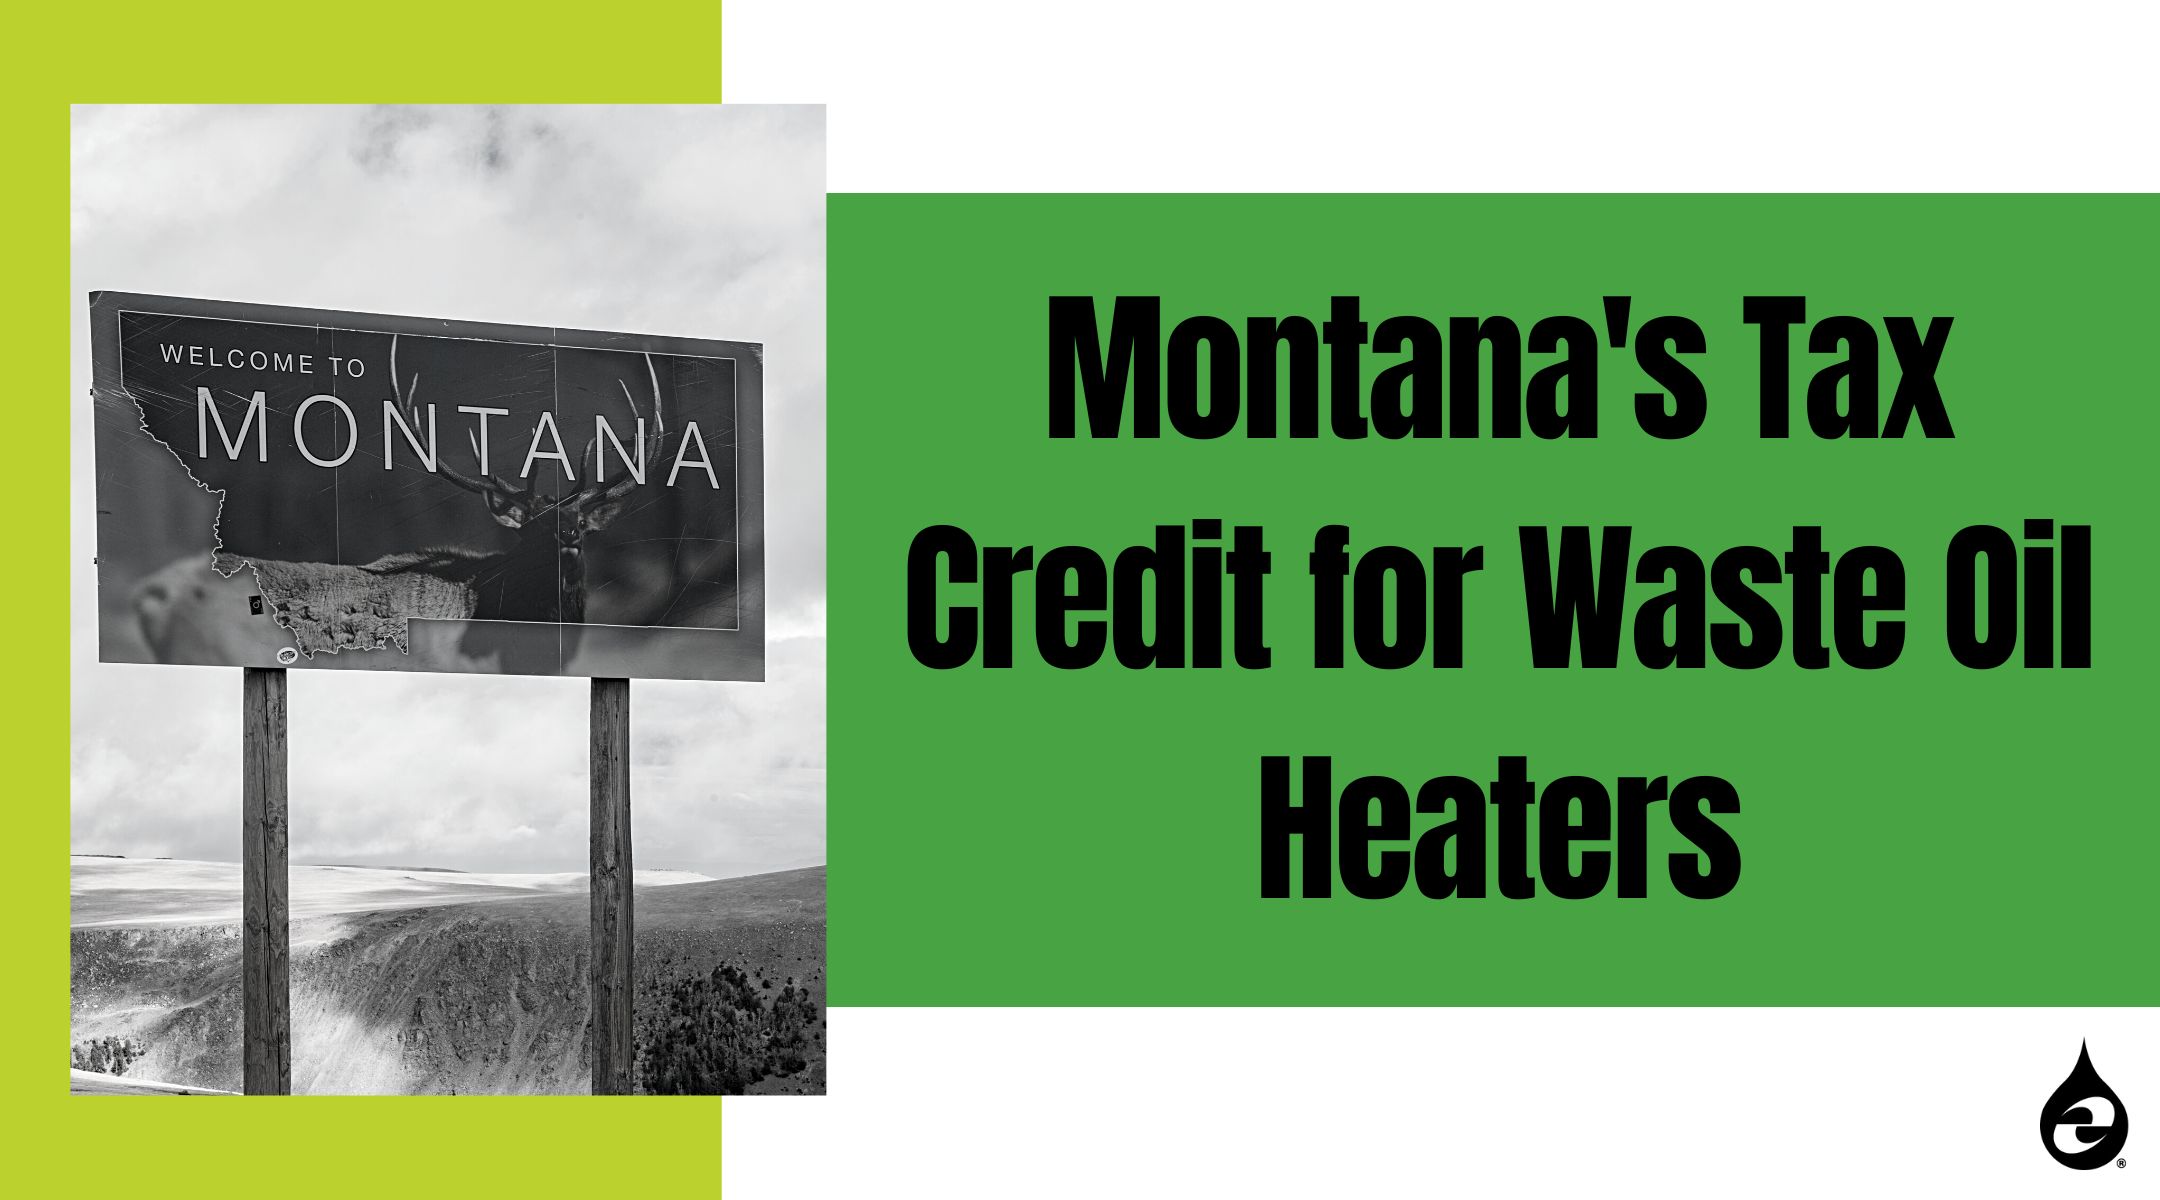 Montana's Tax Credit for Waste Oil Heaters